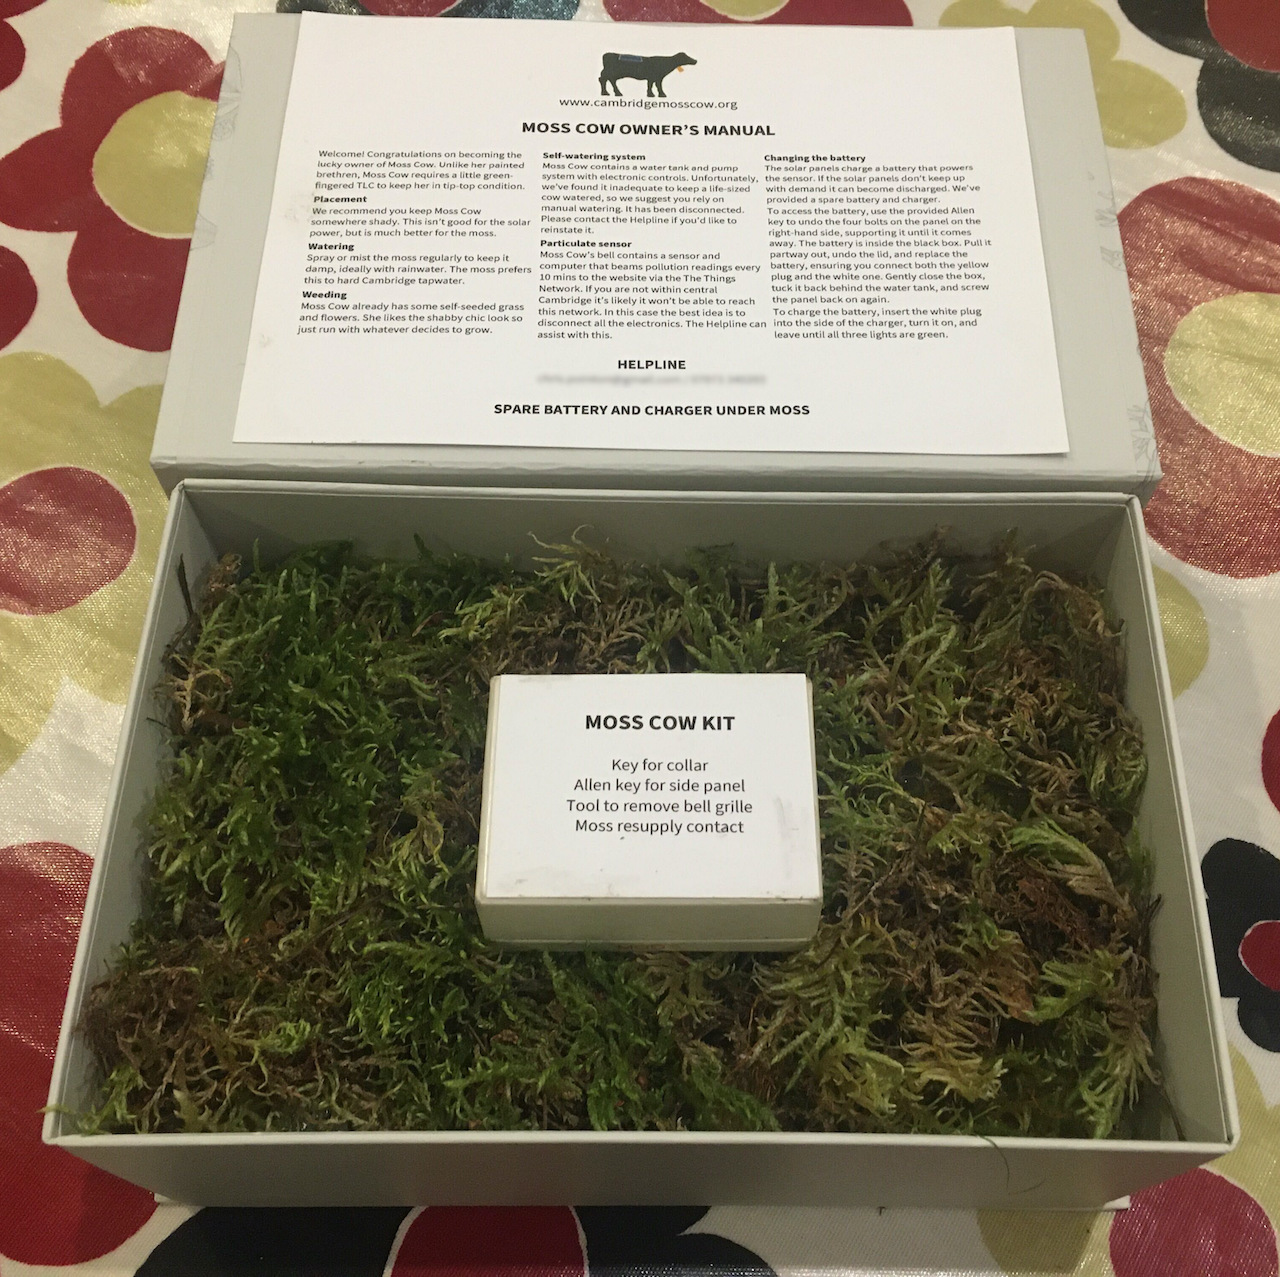 Moss Cow care pack including instructions and toolkit